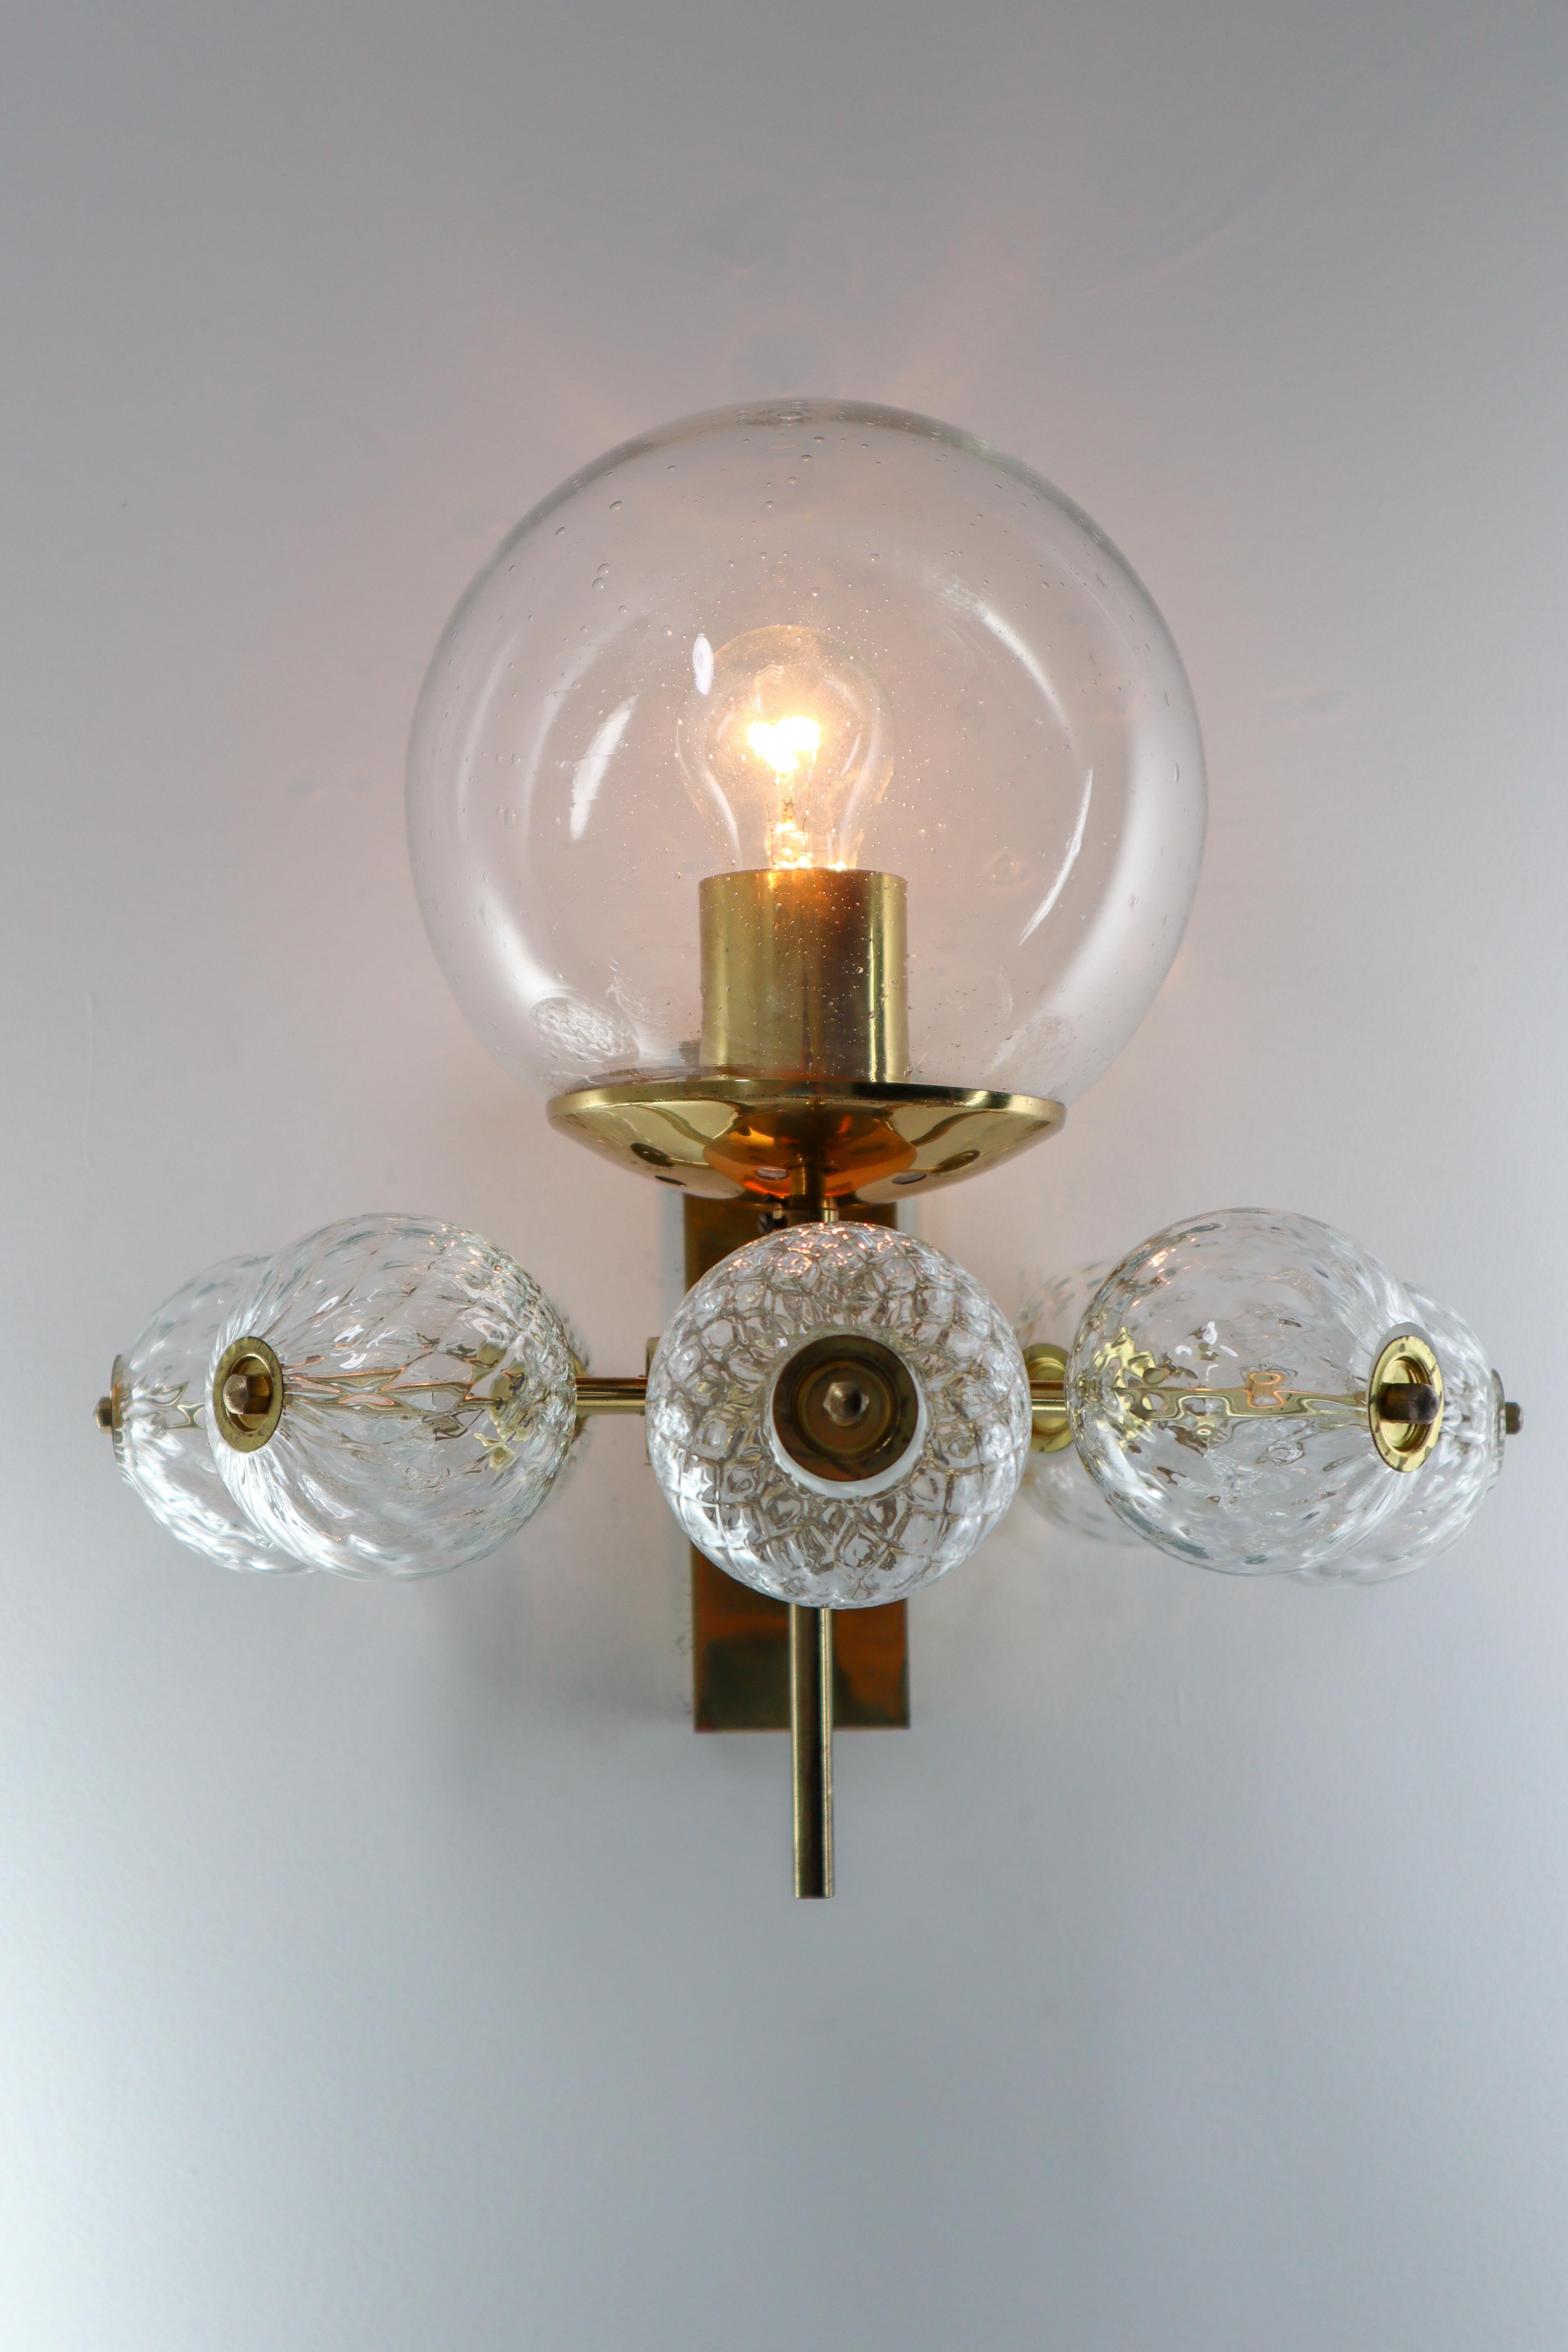 Hotel Wall Chandeliers with Brass Fixture, European, 1970s For Sale 1